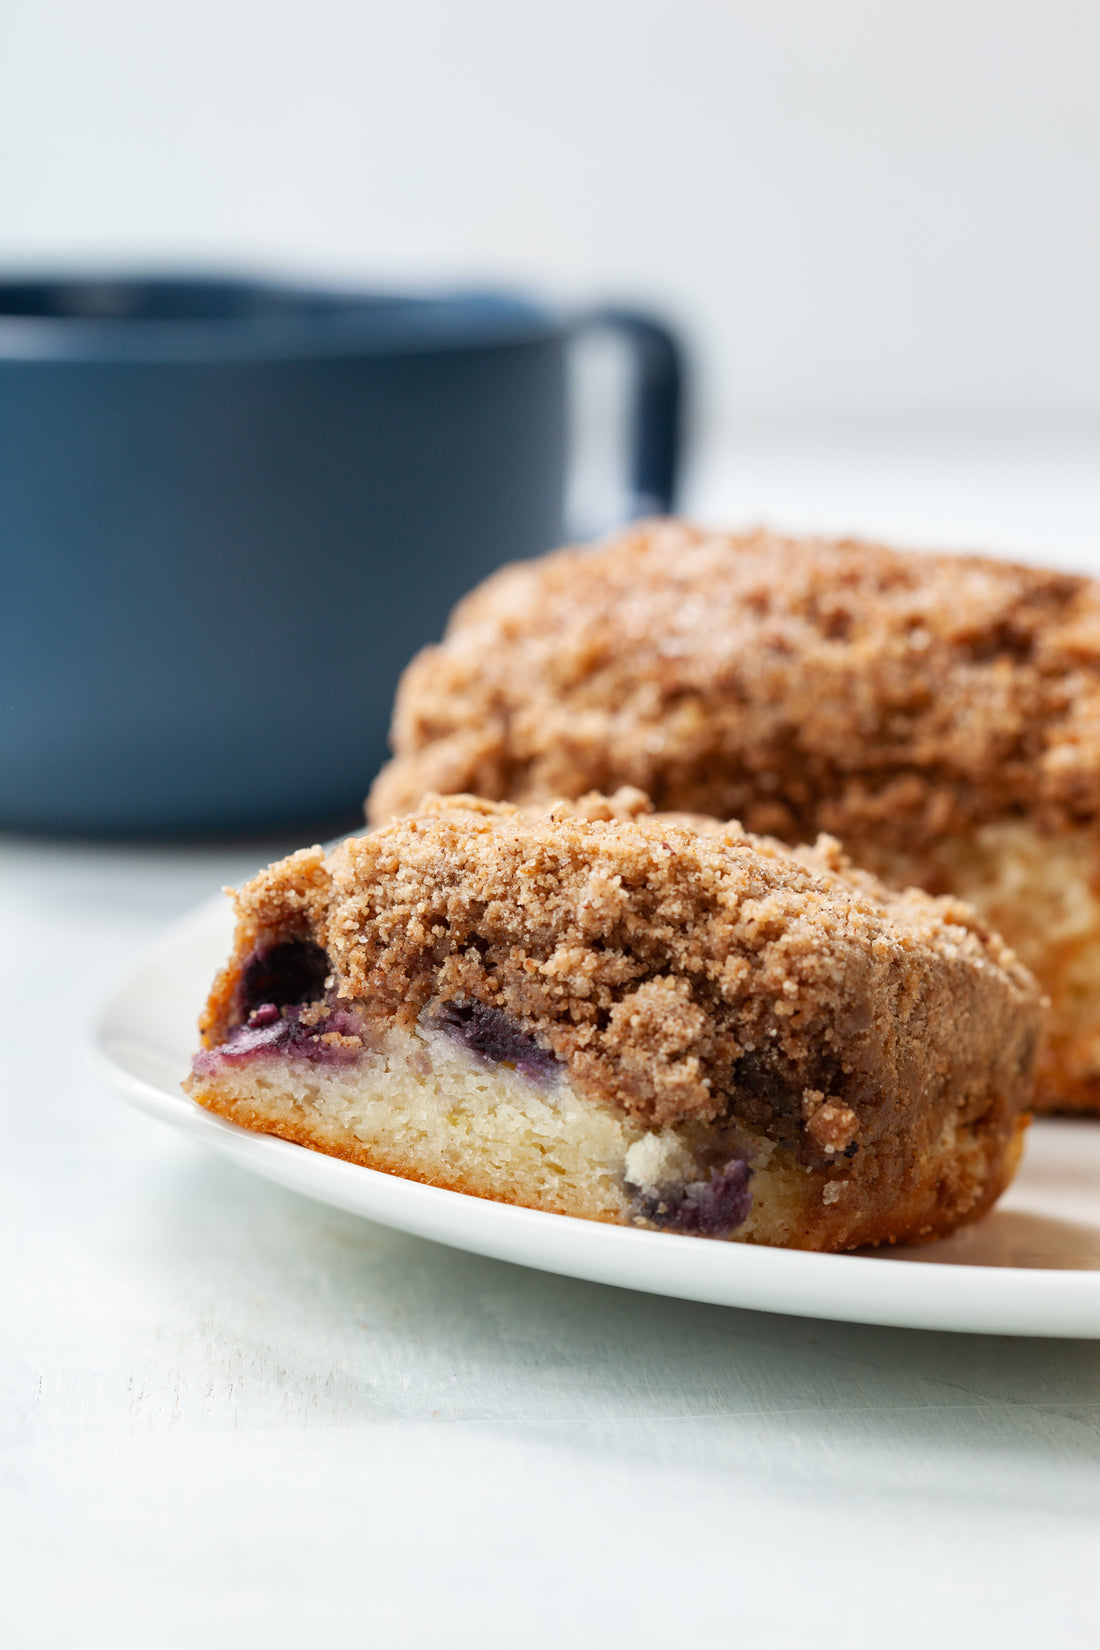 Blueberry Streuselkuchen is the ultimate German crumb cake from William Greenberg Desserts